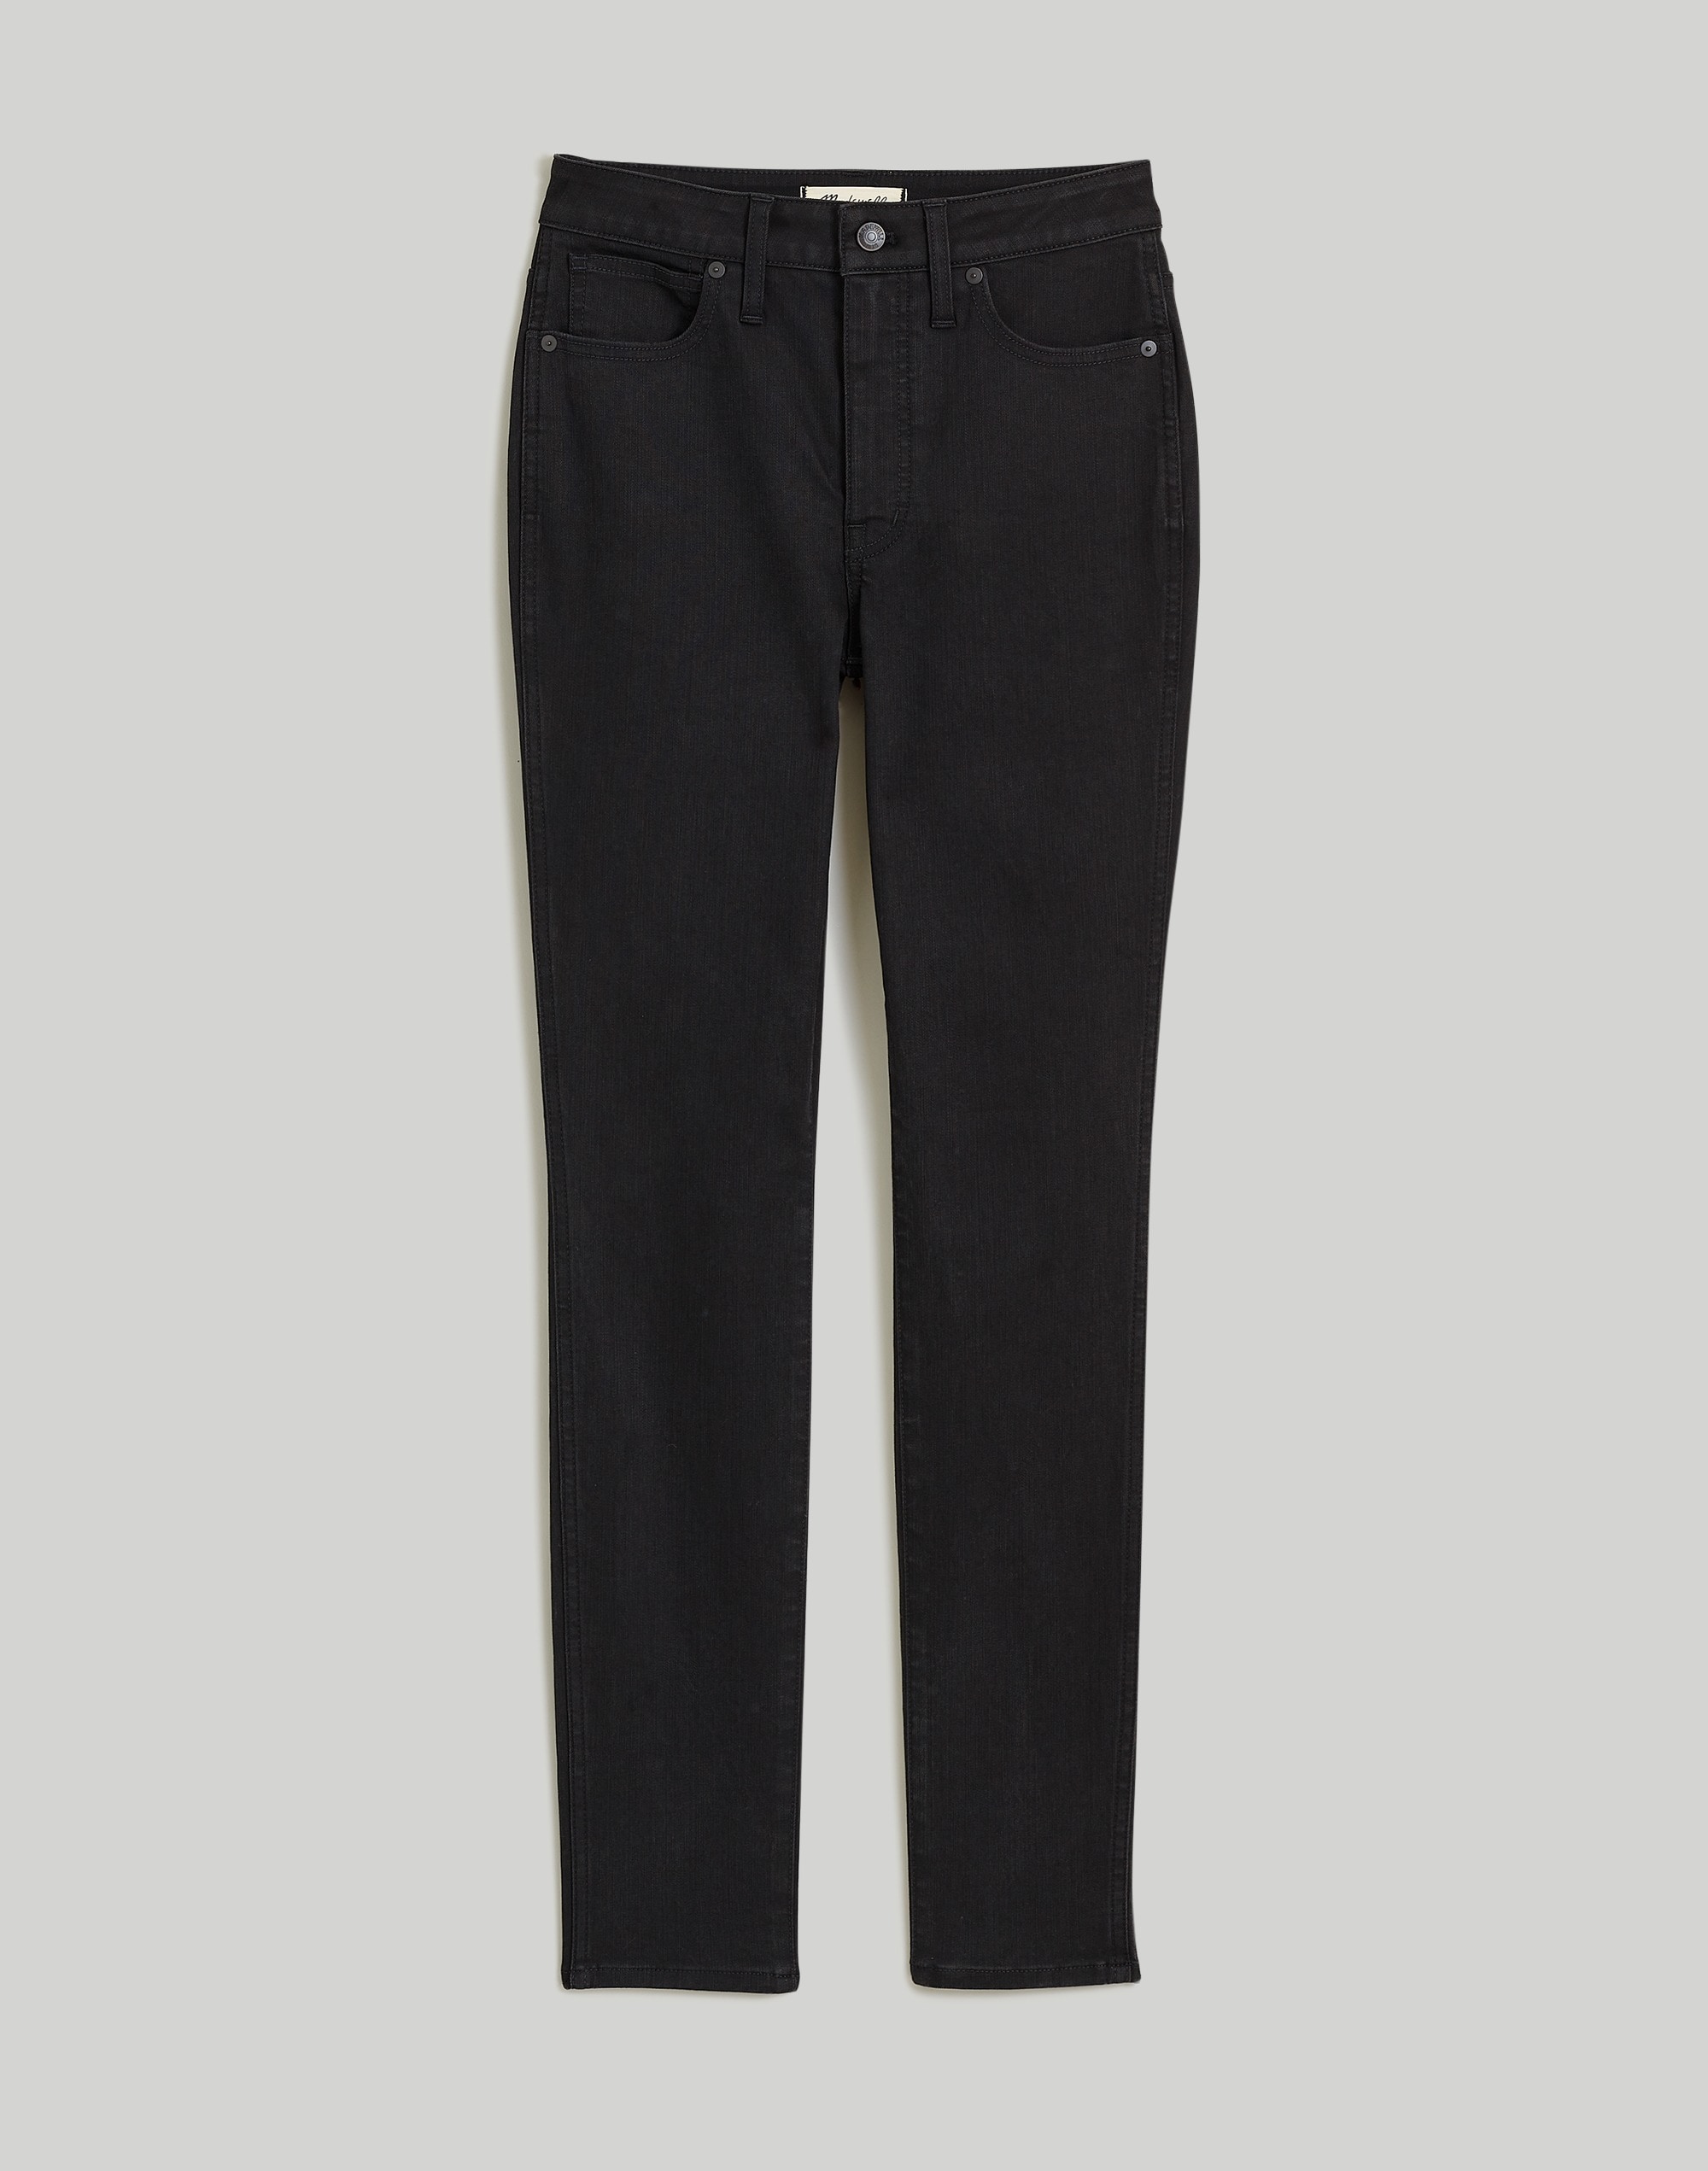 Tall Curvy High-Rise Skinny Jeans in Black Frost